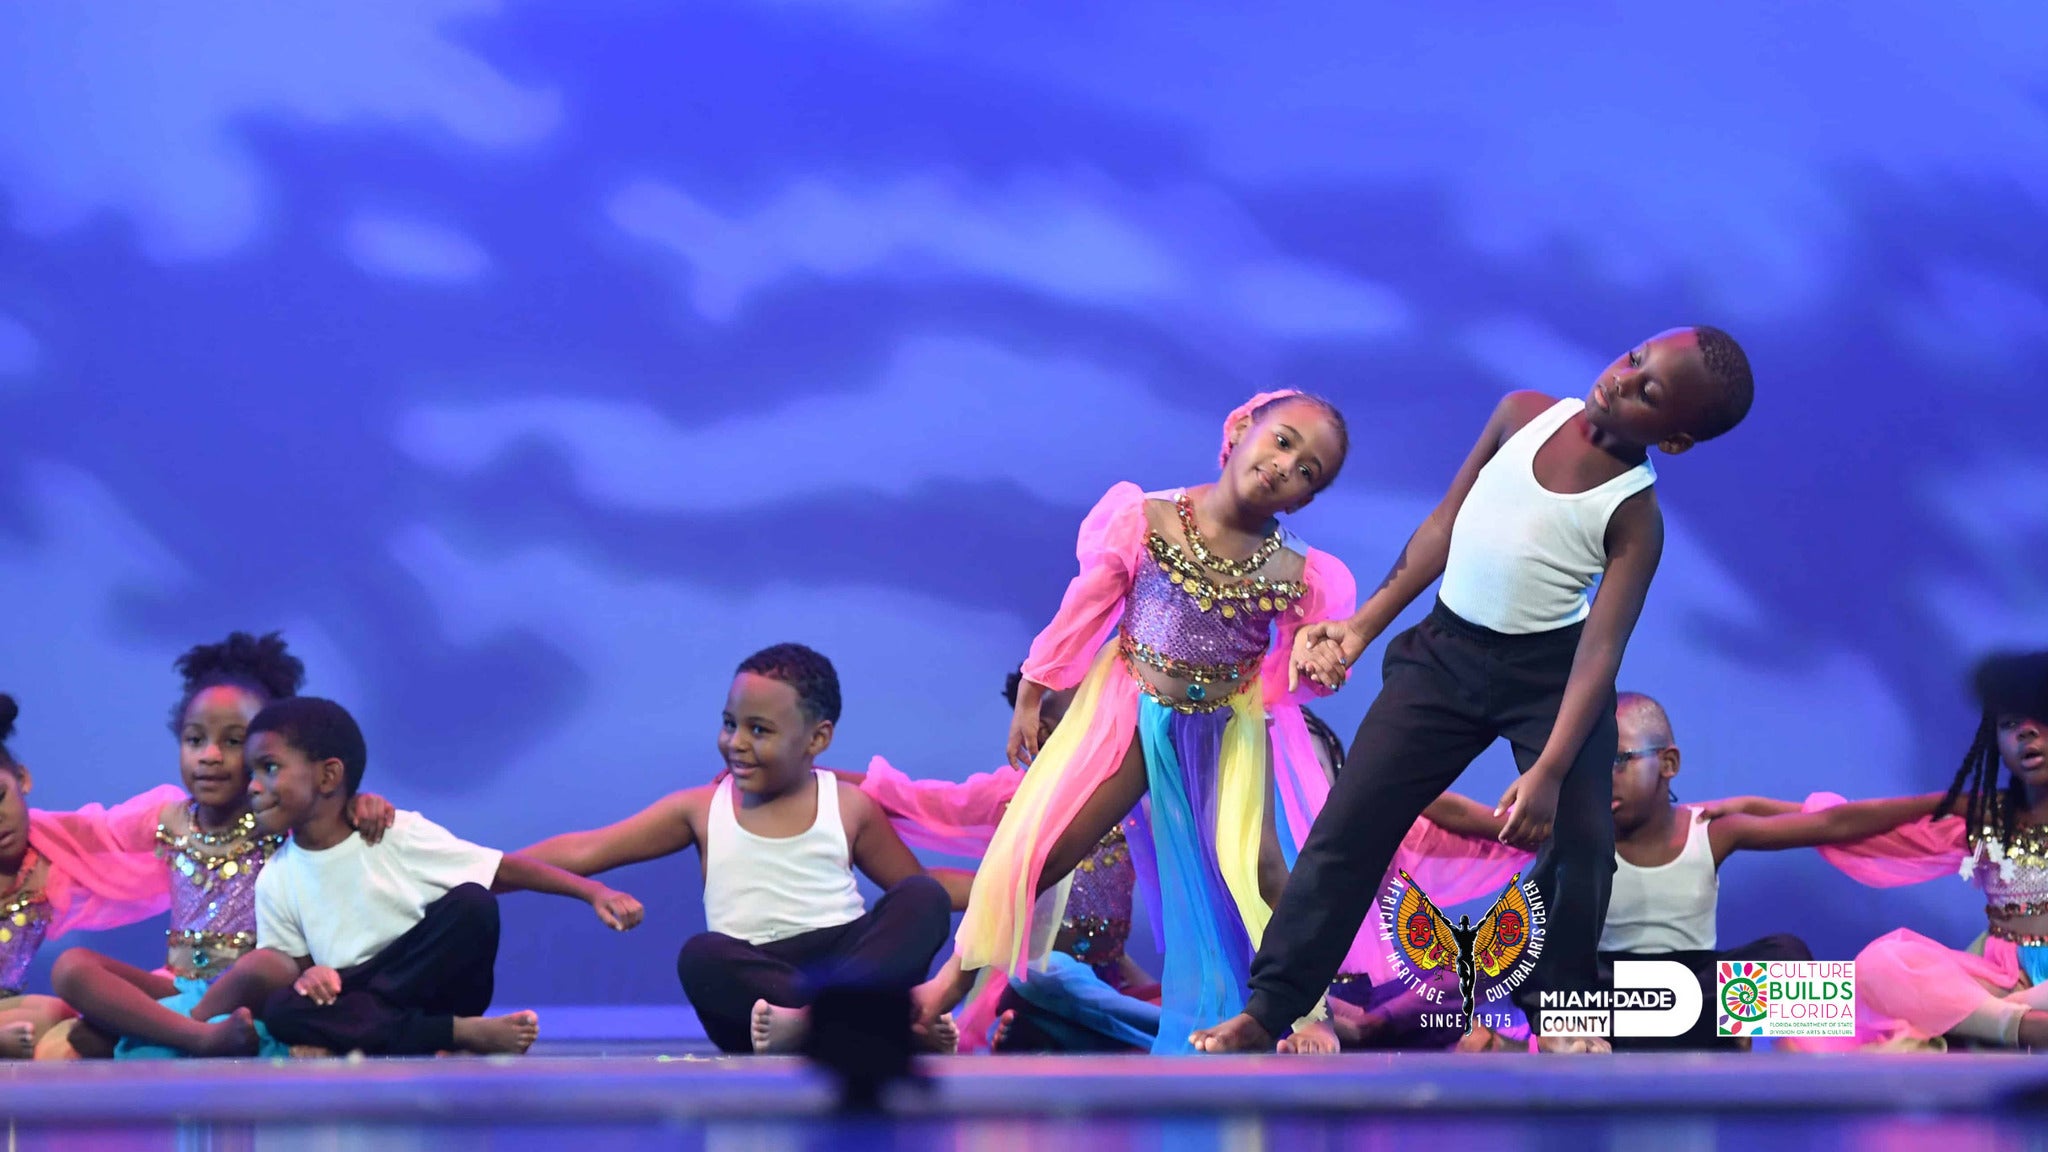 Dance & Musical Theater 2022 by Summer Arts Conservatory Arts – AHCAC